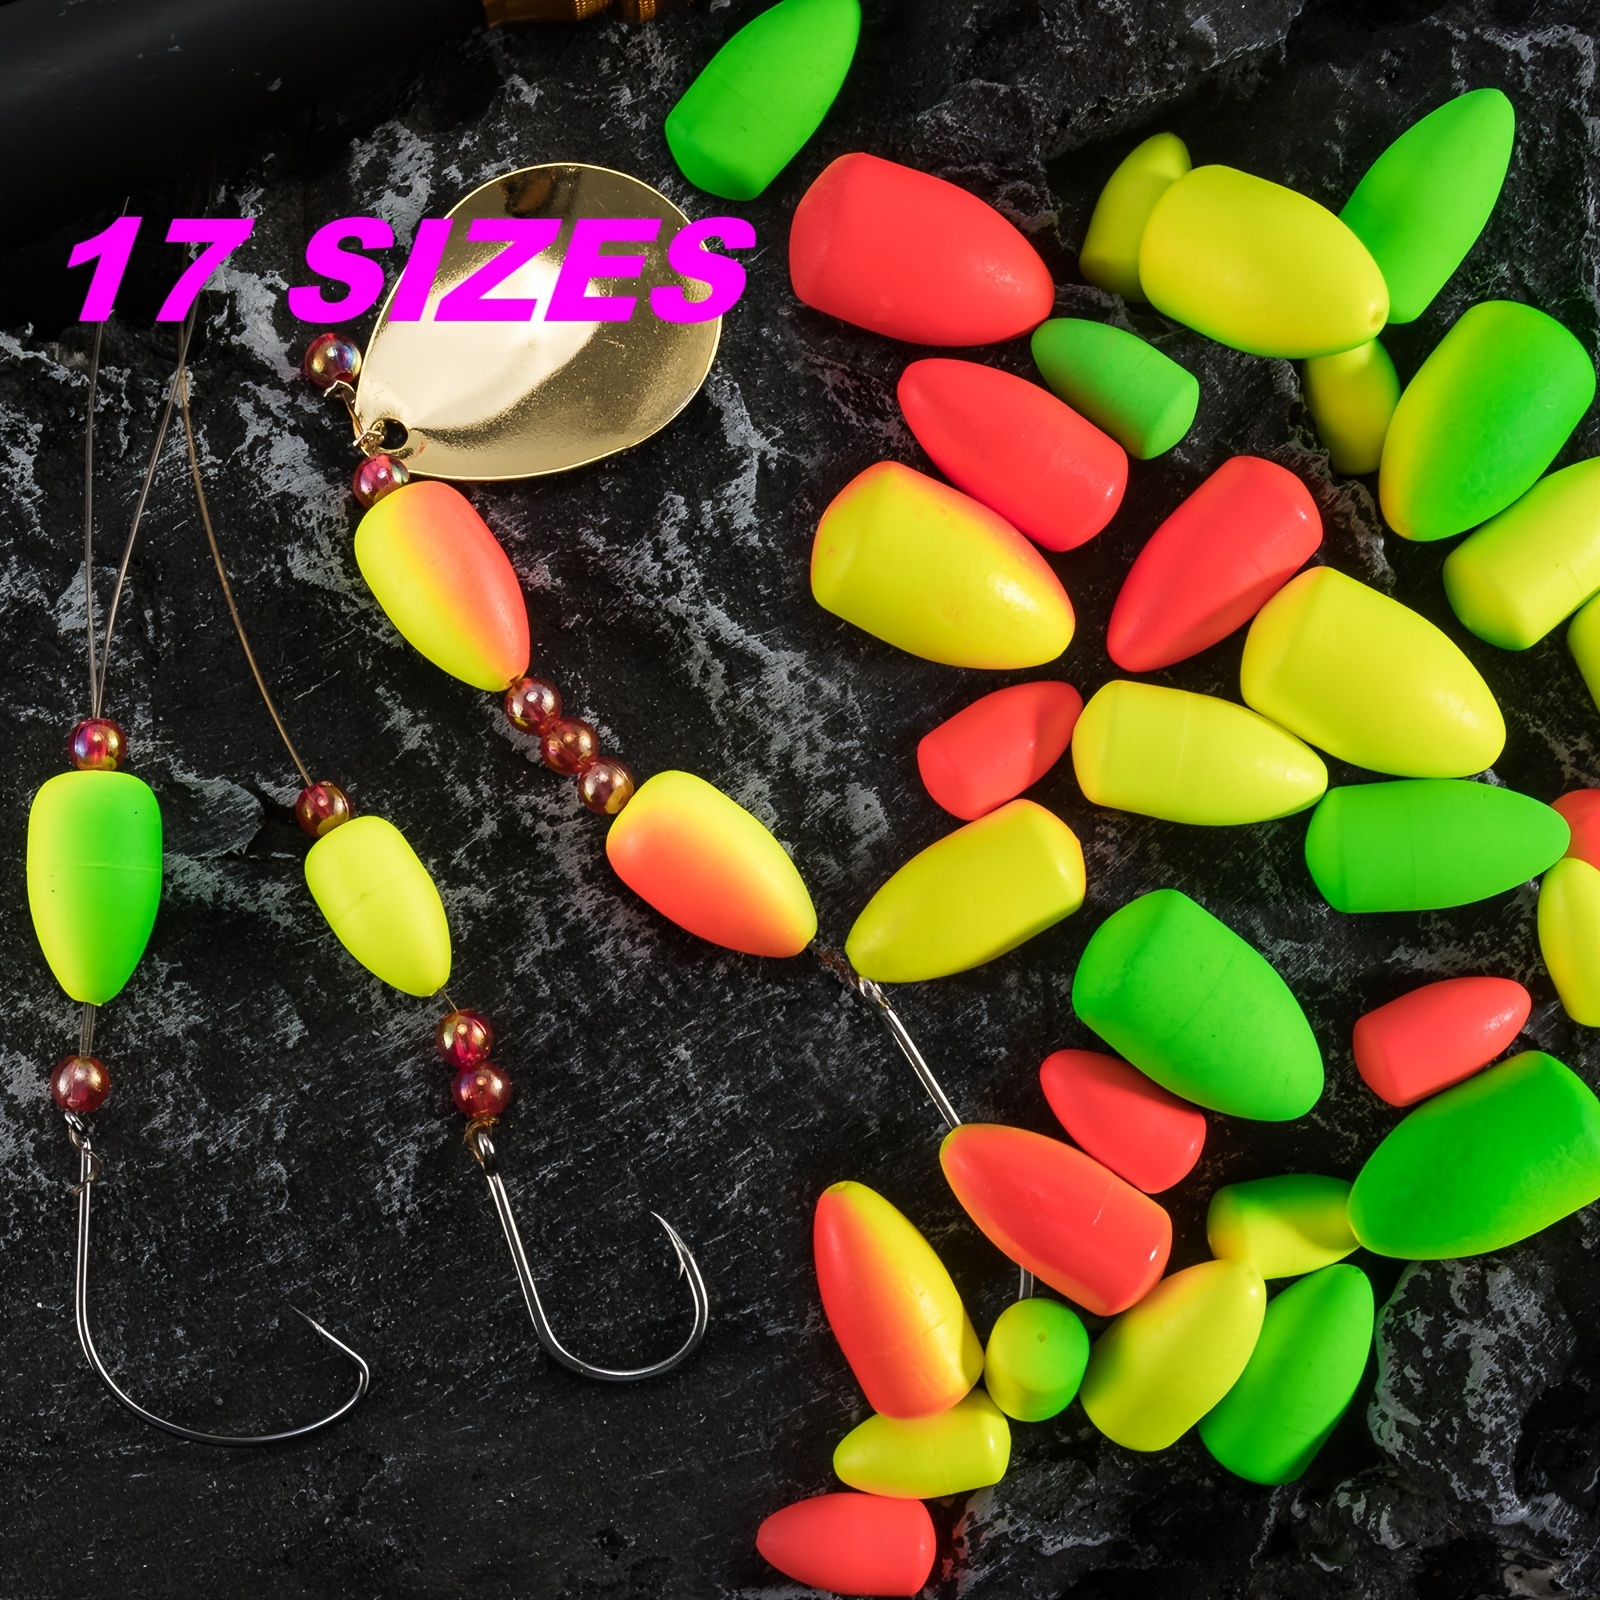 Dioche Glow Rig Beads, 100pcs/pack Plastic Round Beads Fishing Tackle Lures  Tools Accessory for Outdoor Fishing(6mm-Colorful)